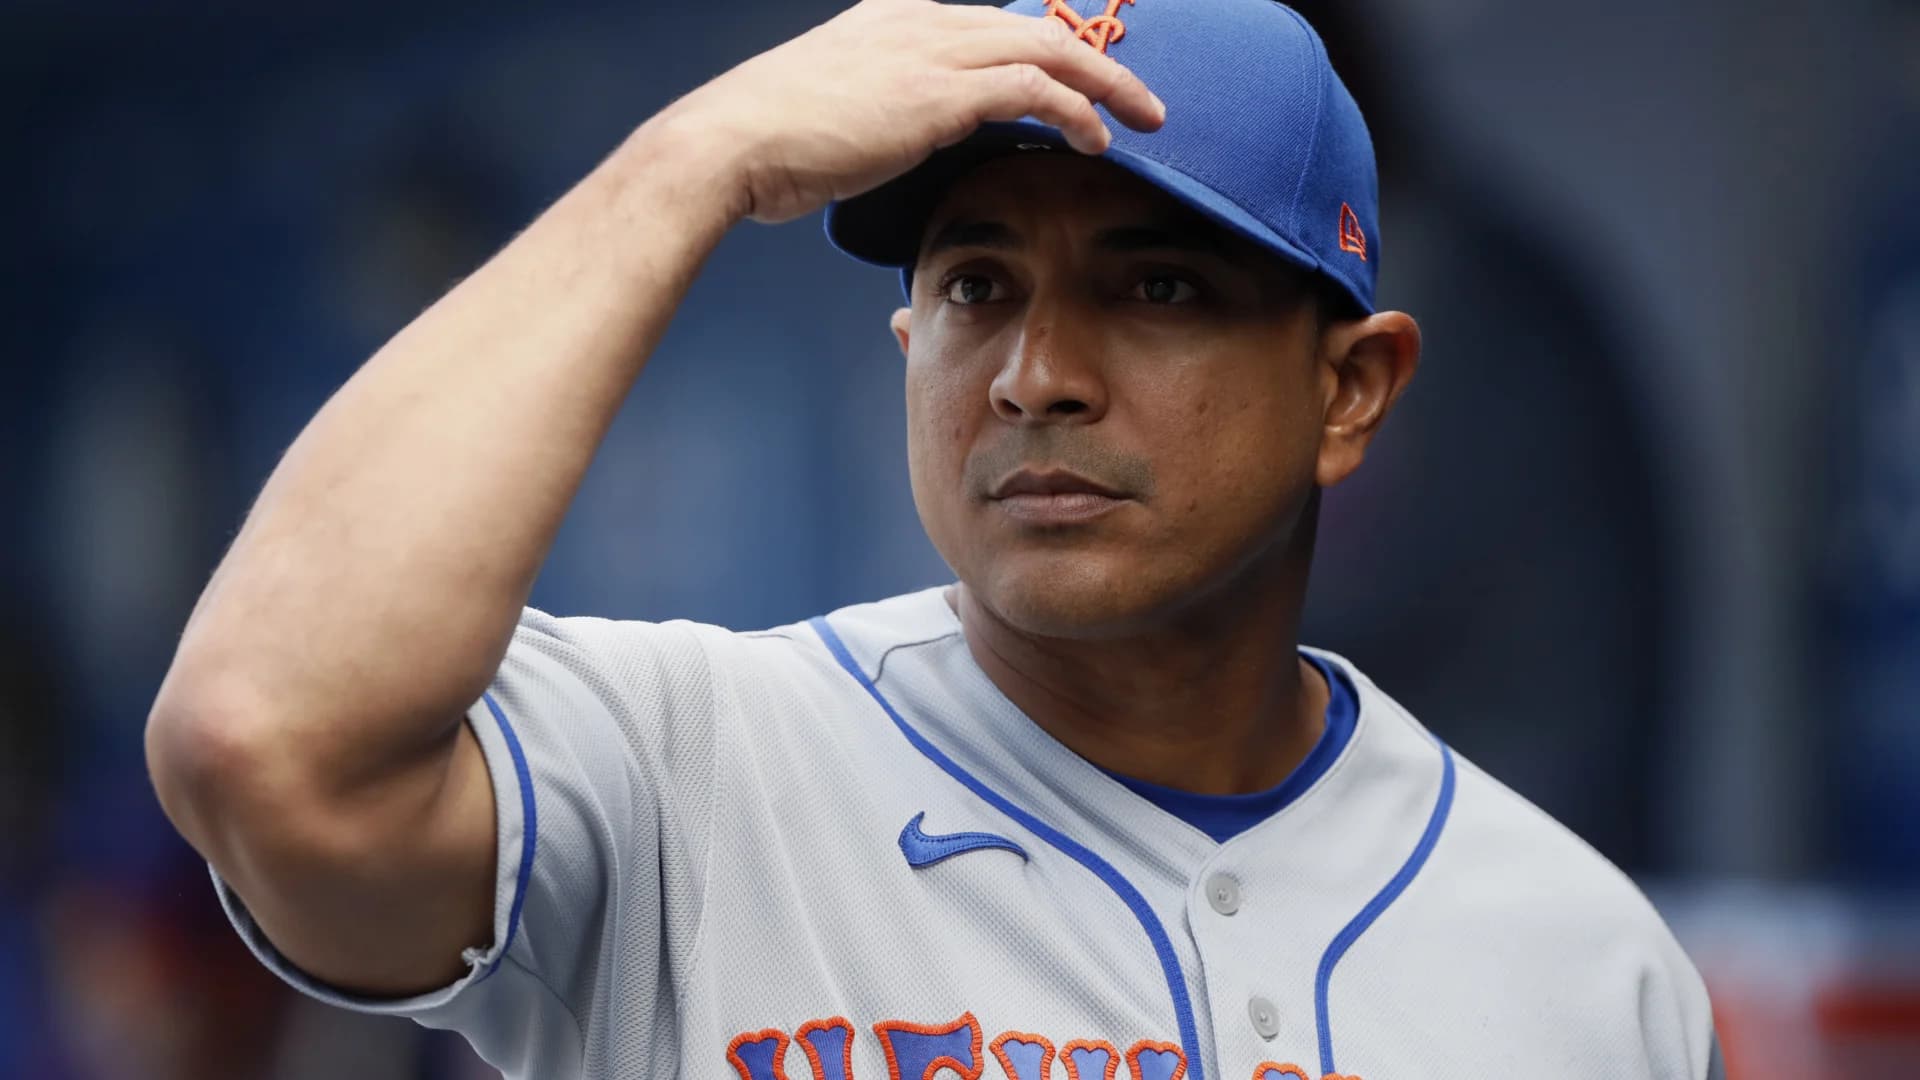 Rojas says no 'second thought' on going from Mets to Yankees